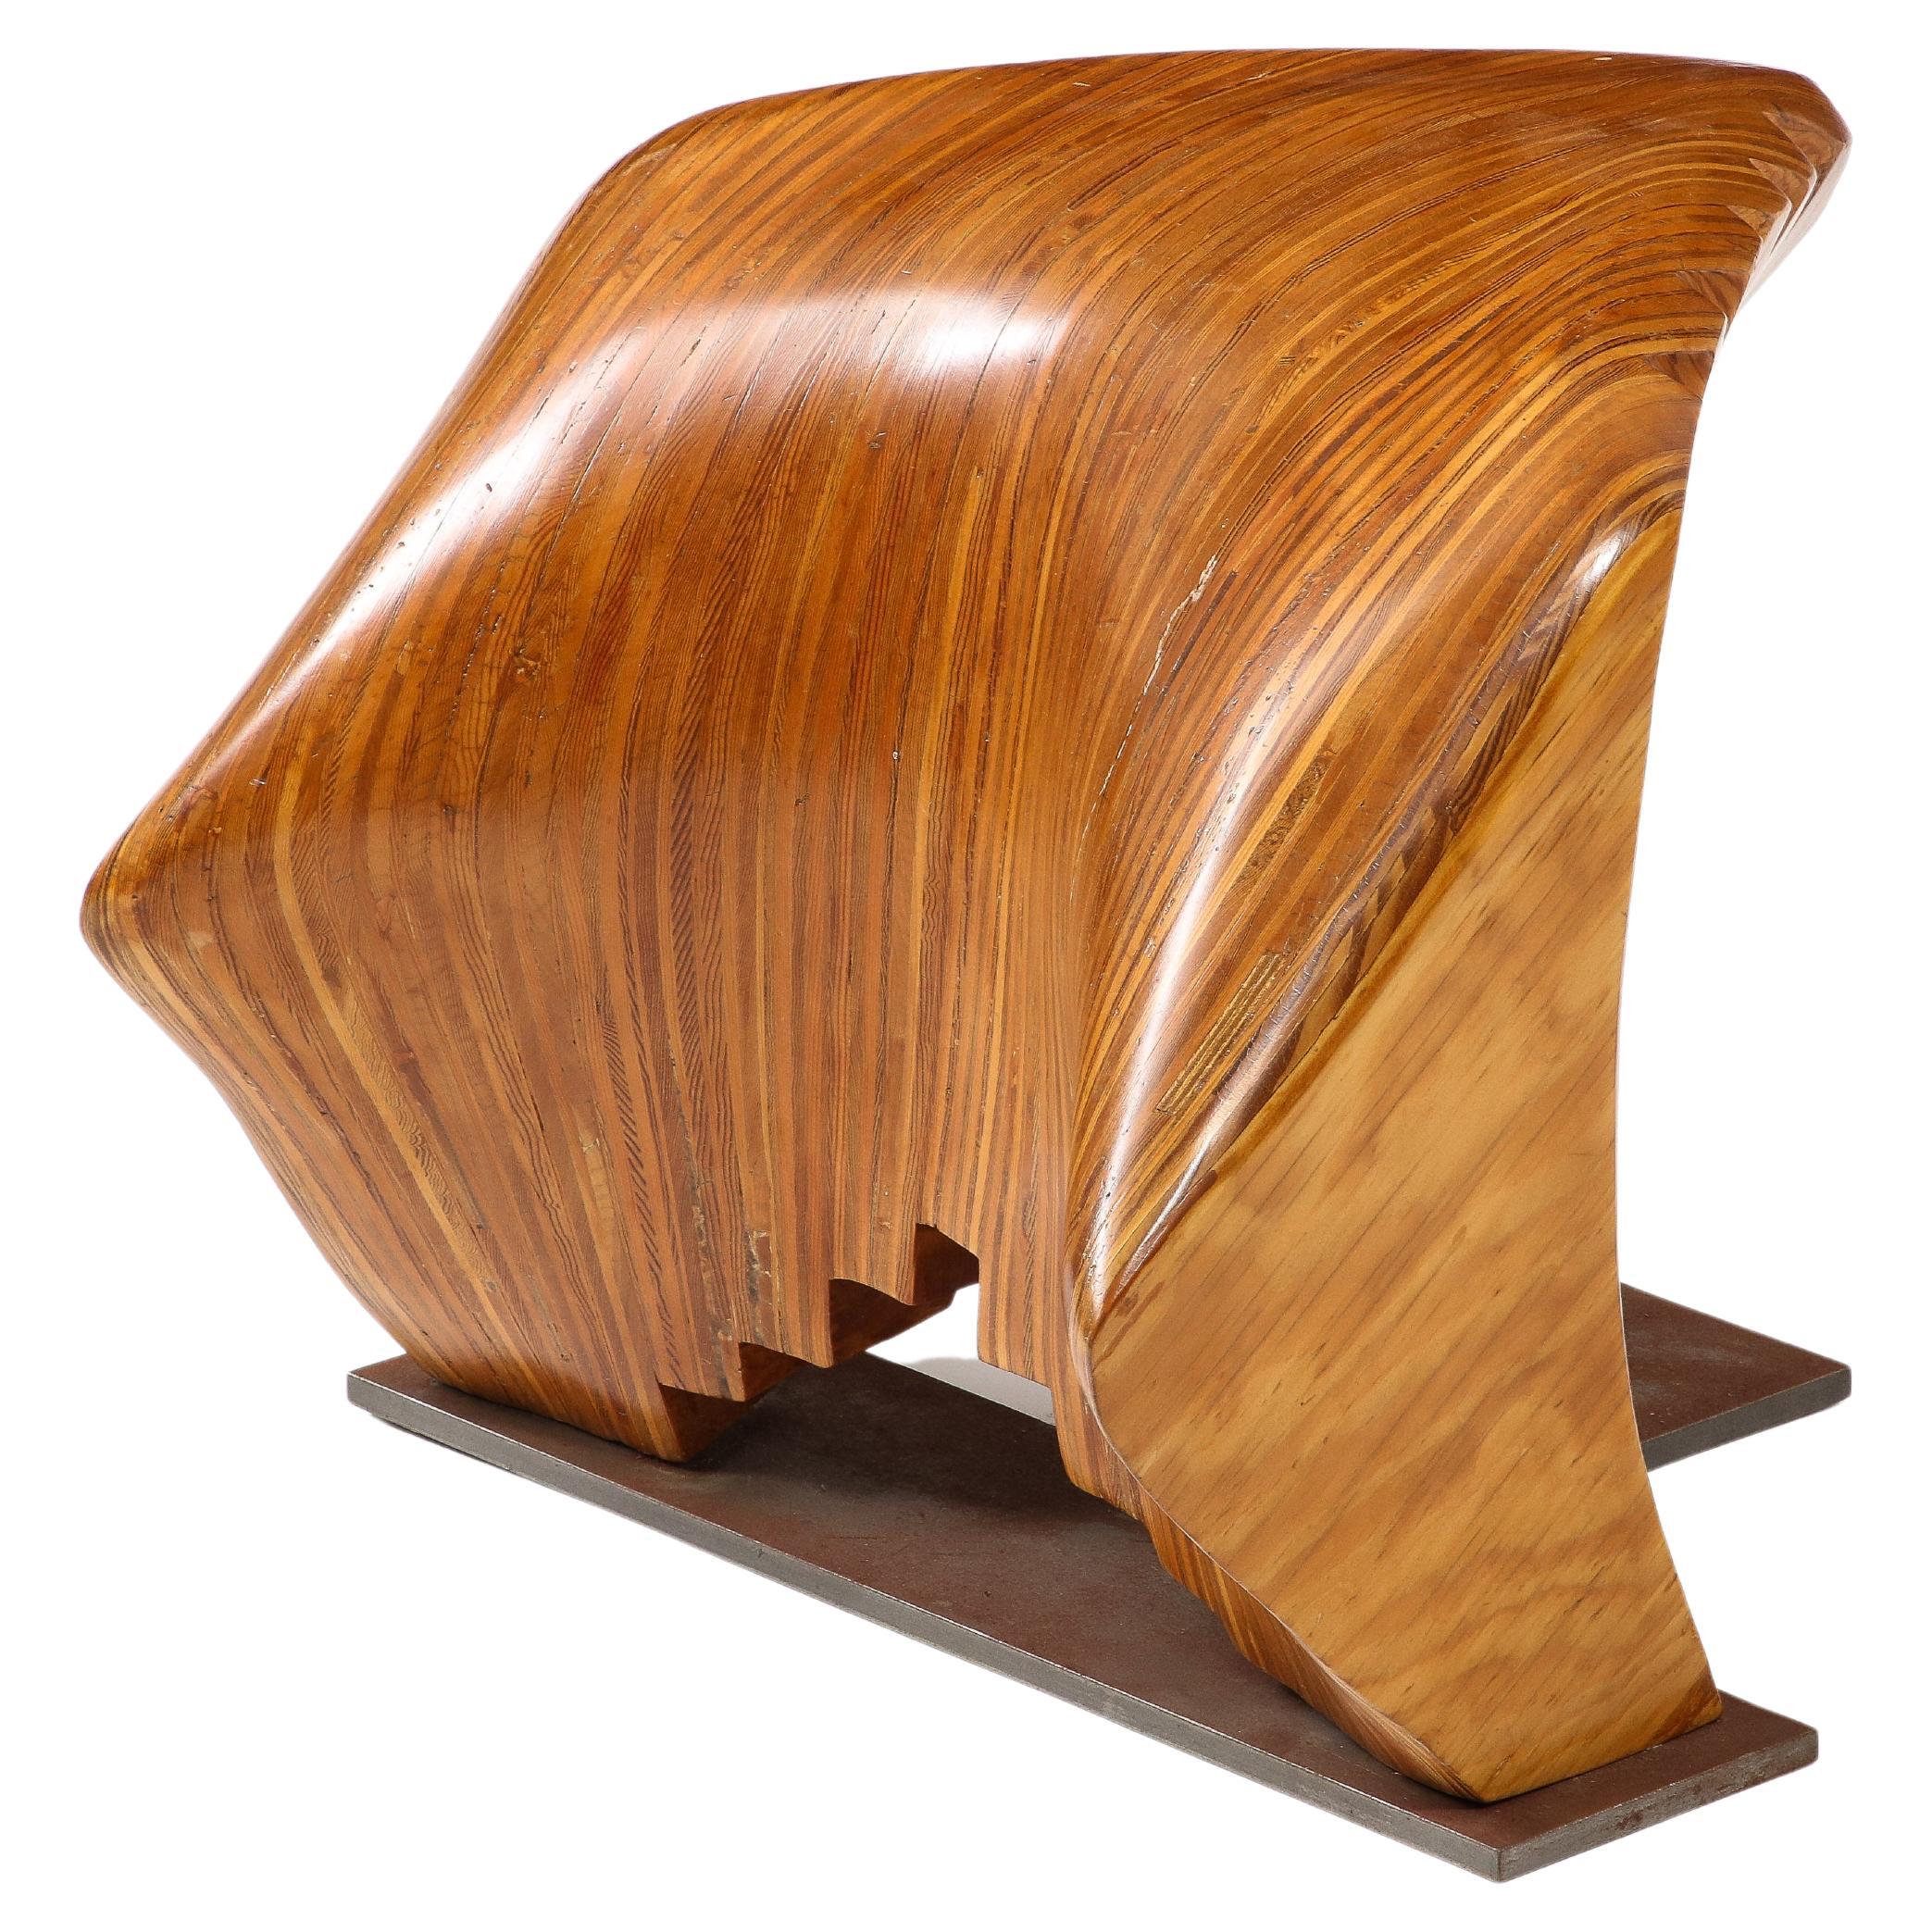 Sculptural Laminated Wood Object or Stool, USA 1960's For Sale